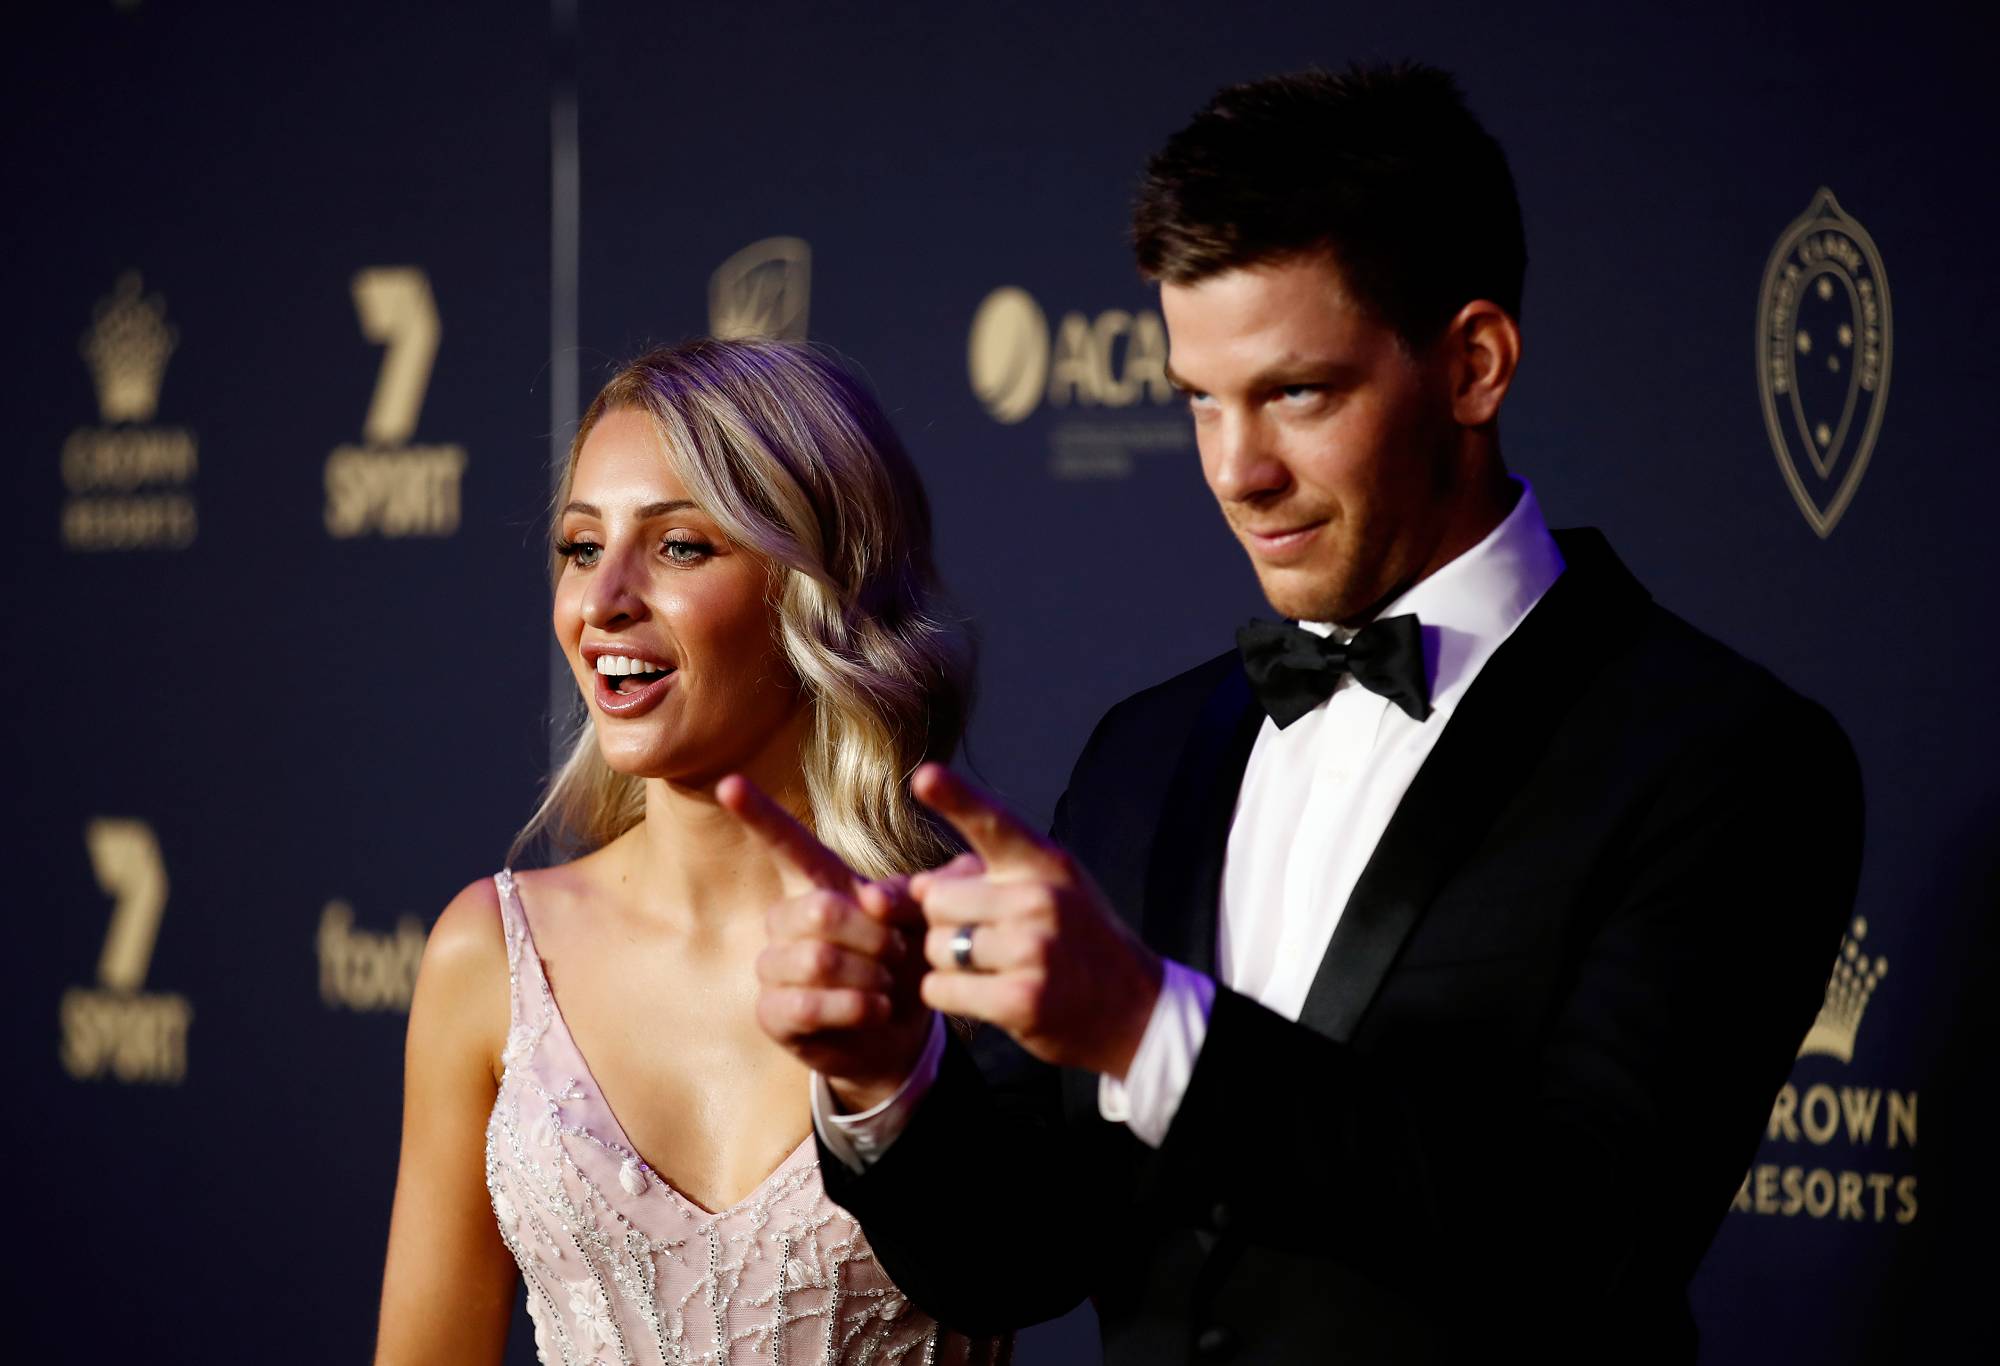 Tim Paine (R) and wife Bonnie Paine arrive ahead of the 2020 Cricket Australia Awards at Crown Palladium on February 10, 2020 in Melbourne, Australia. (Photo by Daniel Pockett/Getty Images)